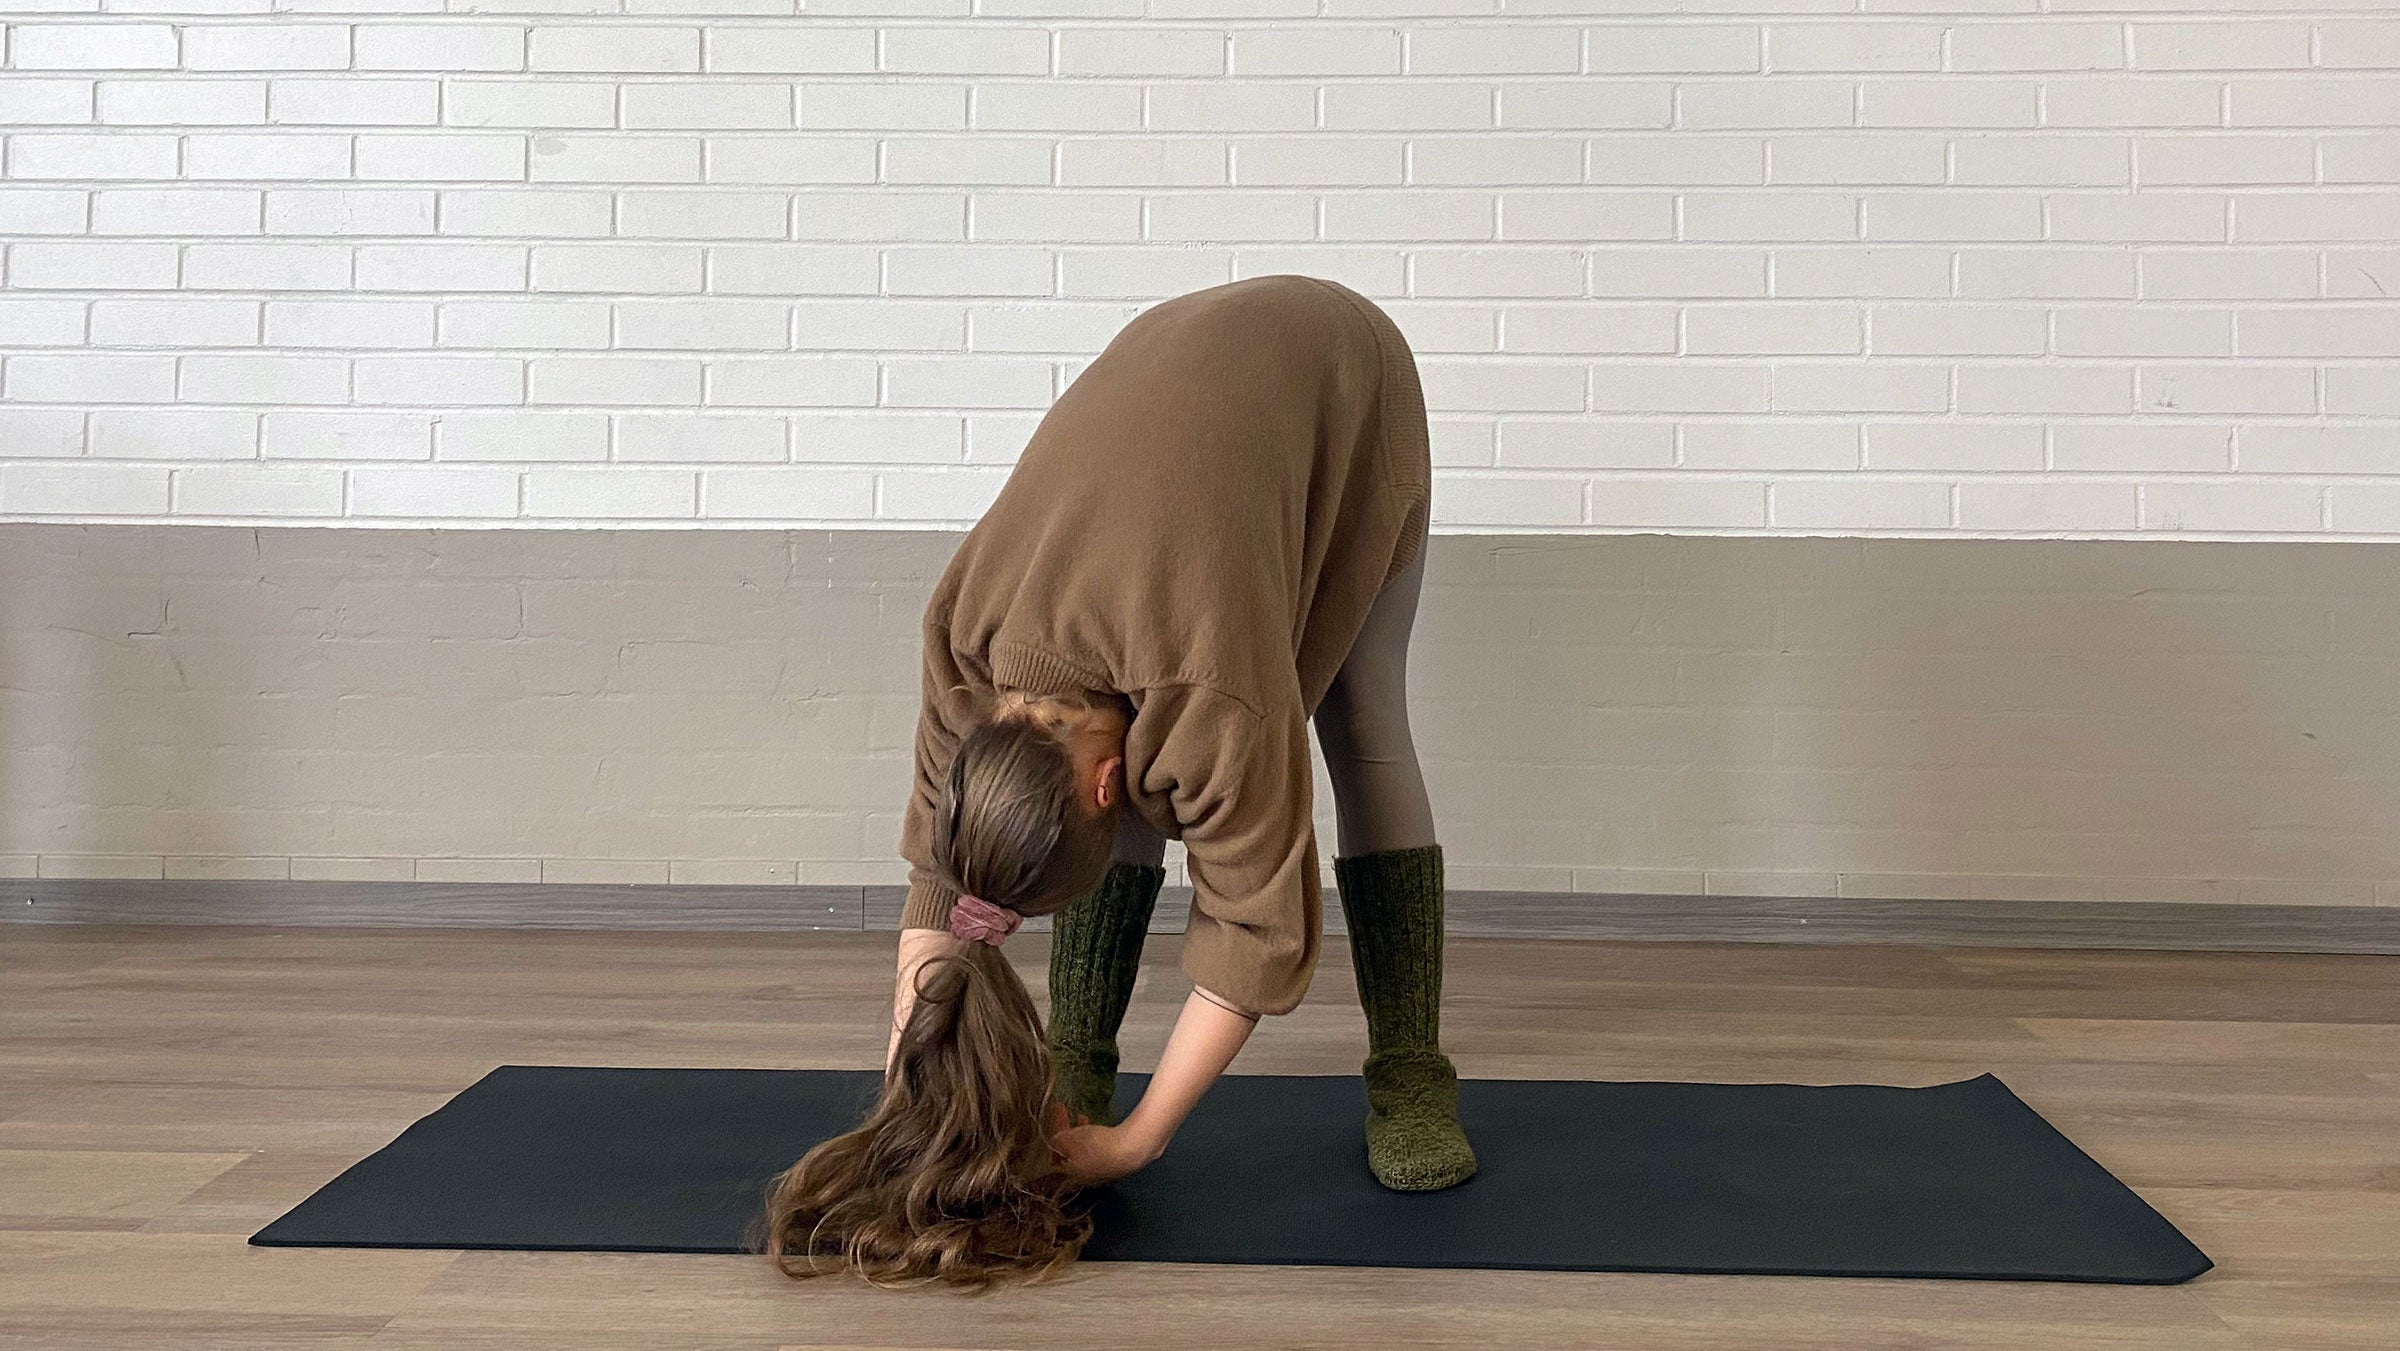 How to do standing splits at the wall in yoga - Quora